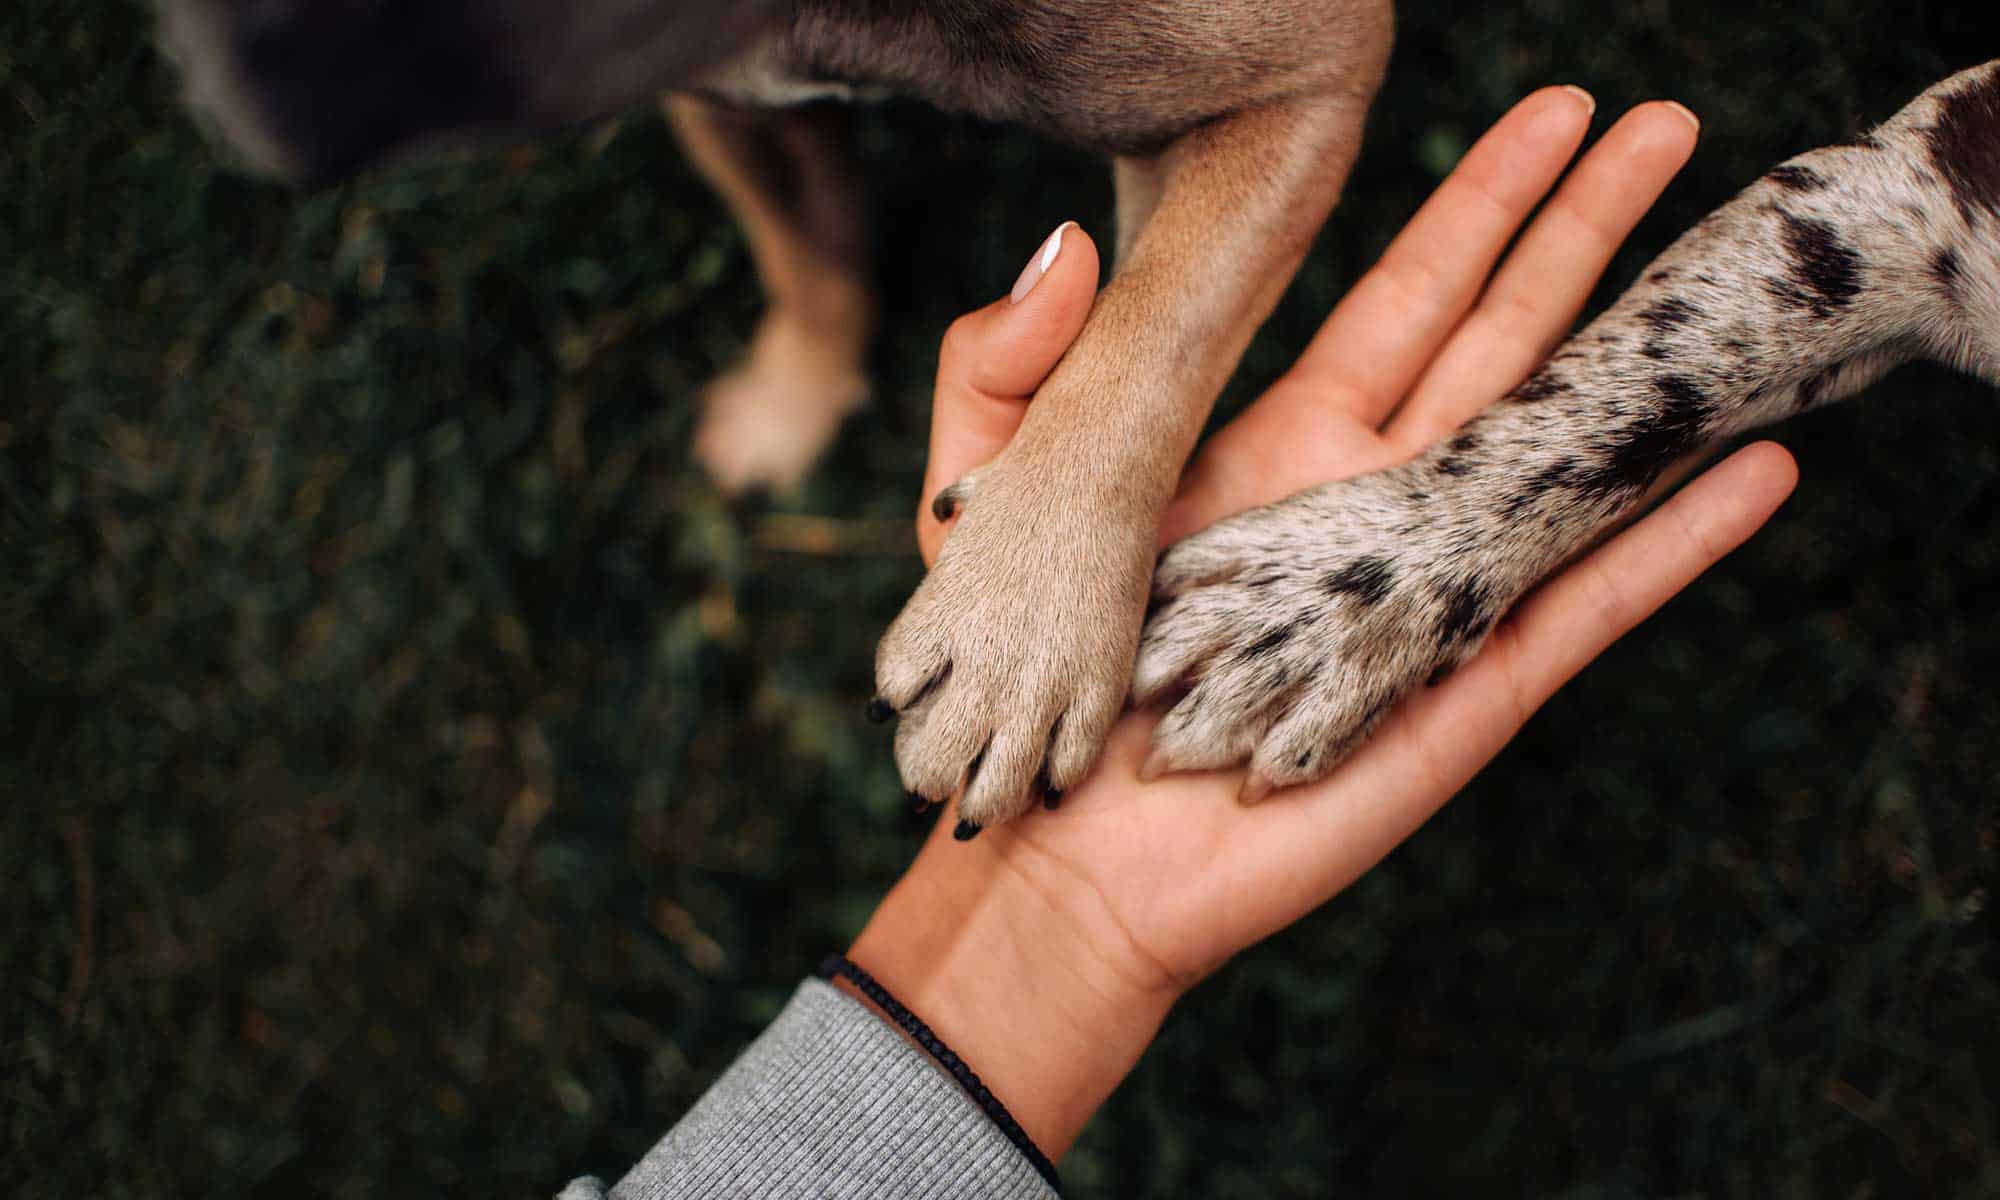 Dogs paw in hand with humans